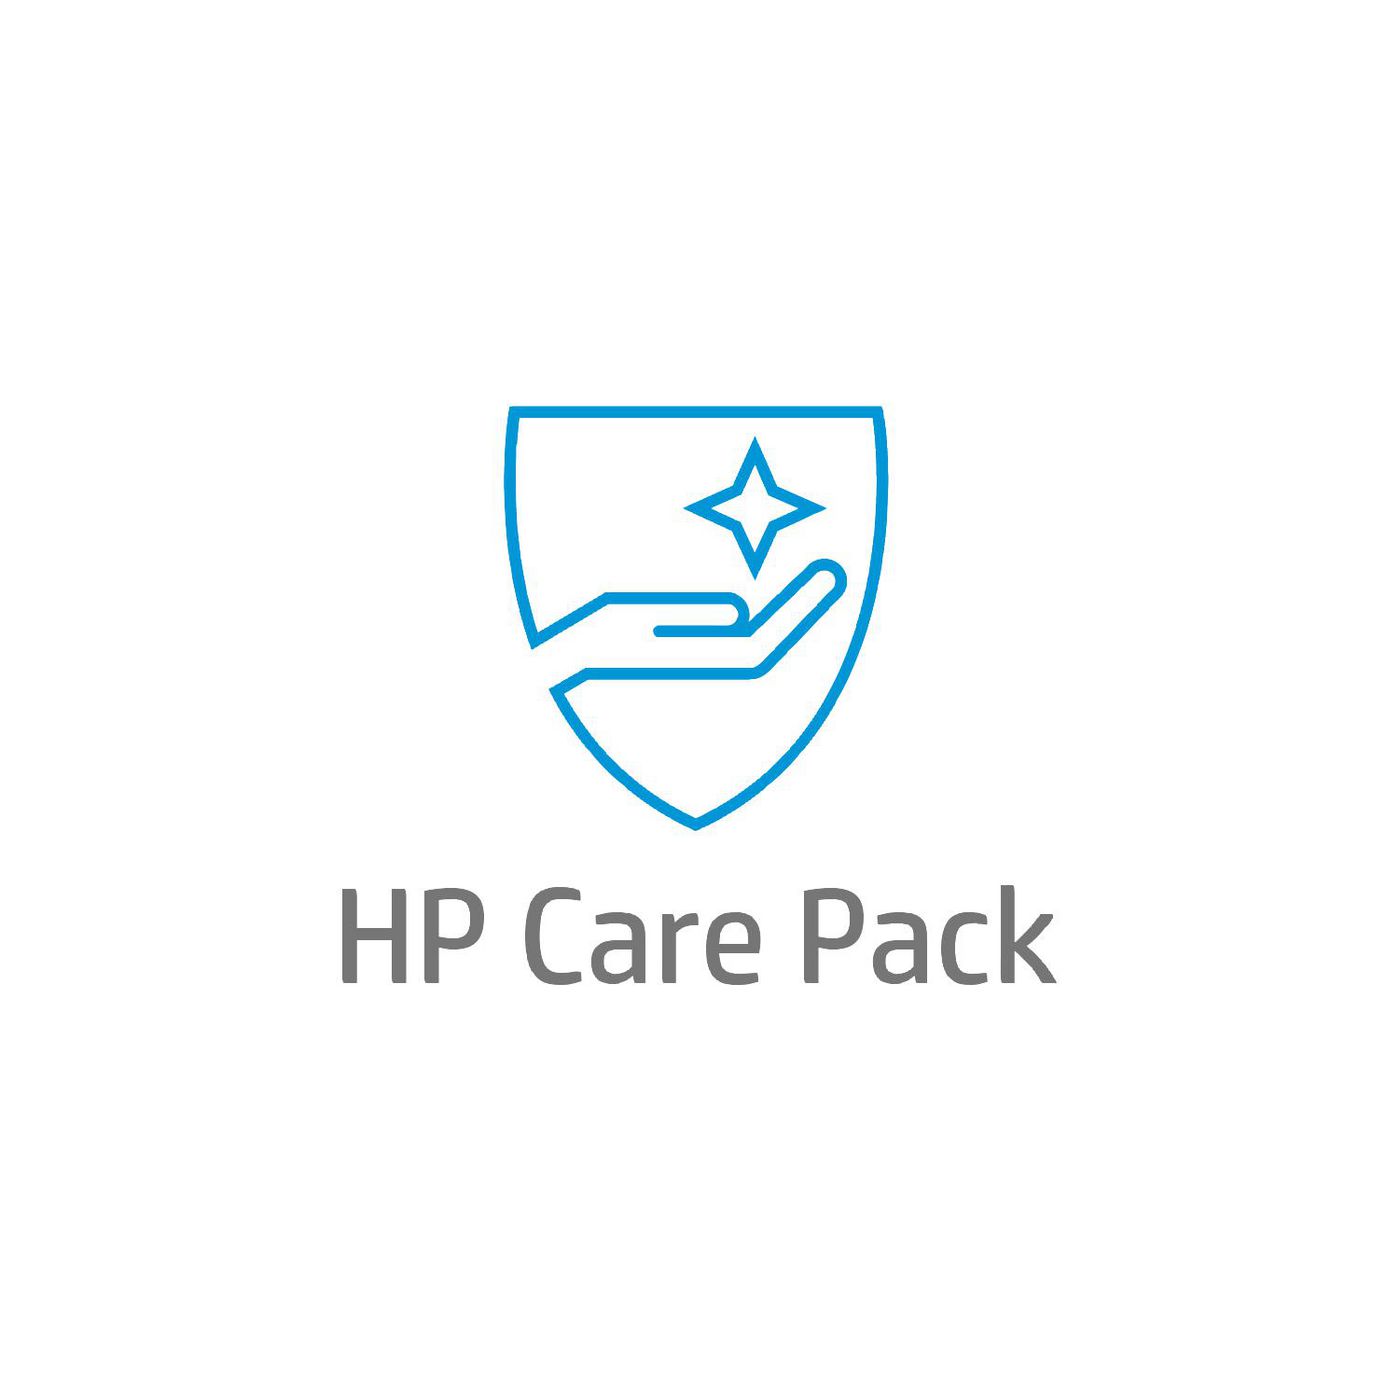 HP Care Pack Installation and Network Configuration - Installation / Konfiguration - Vor-Ort